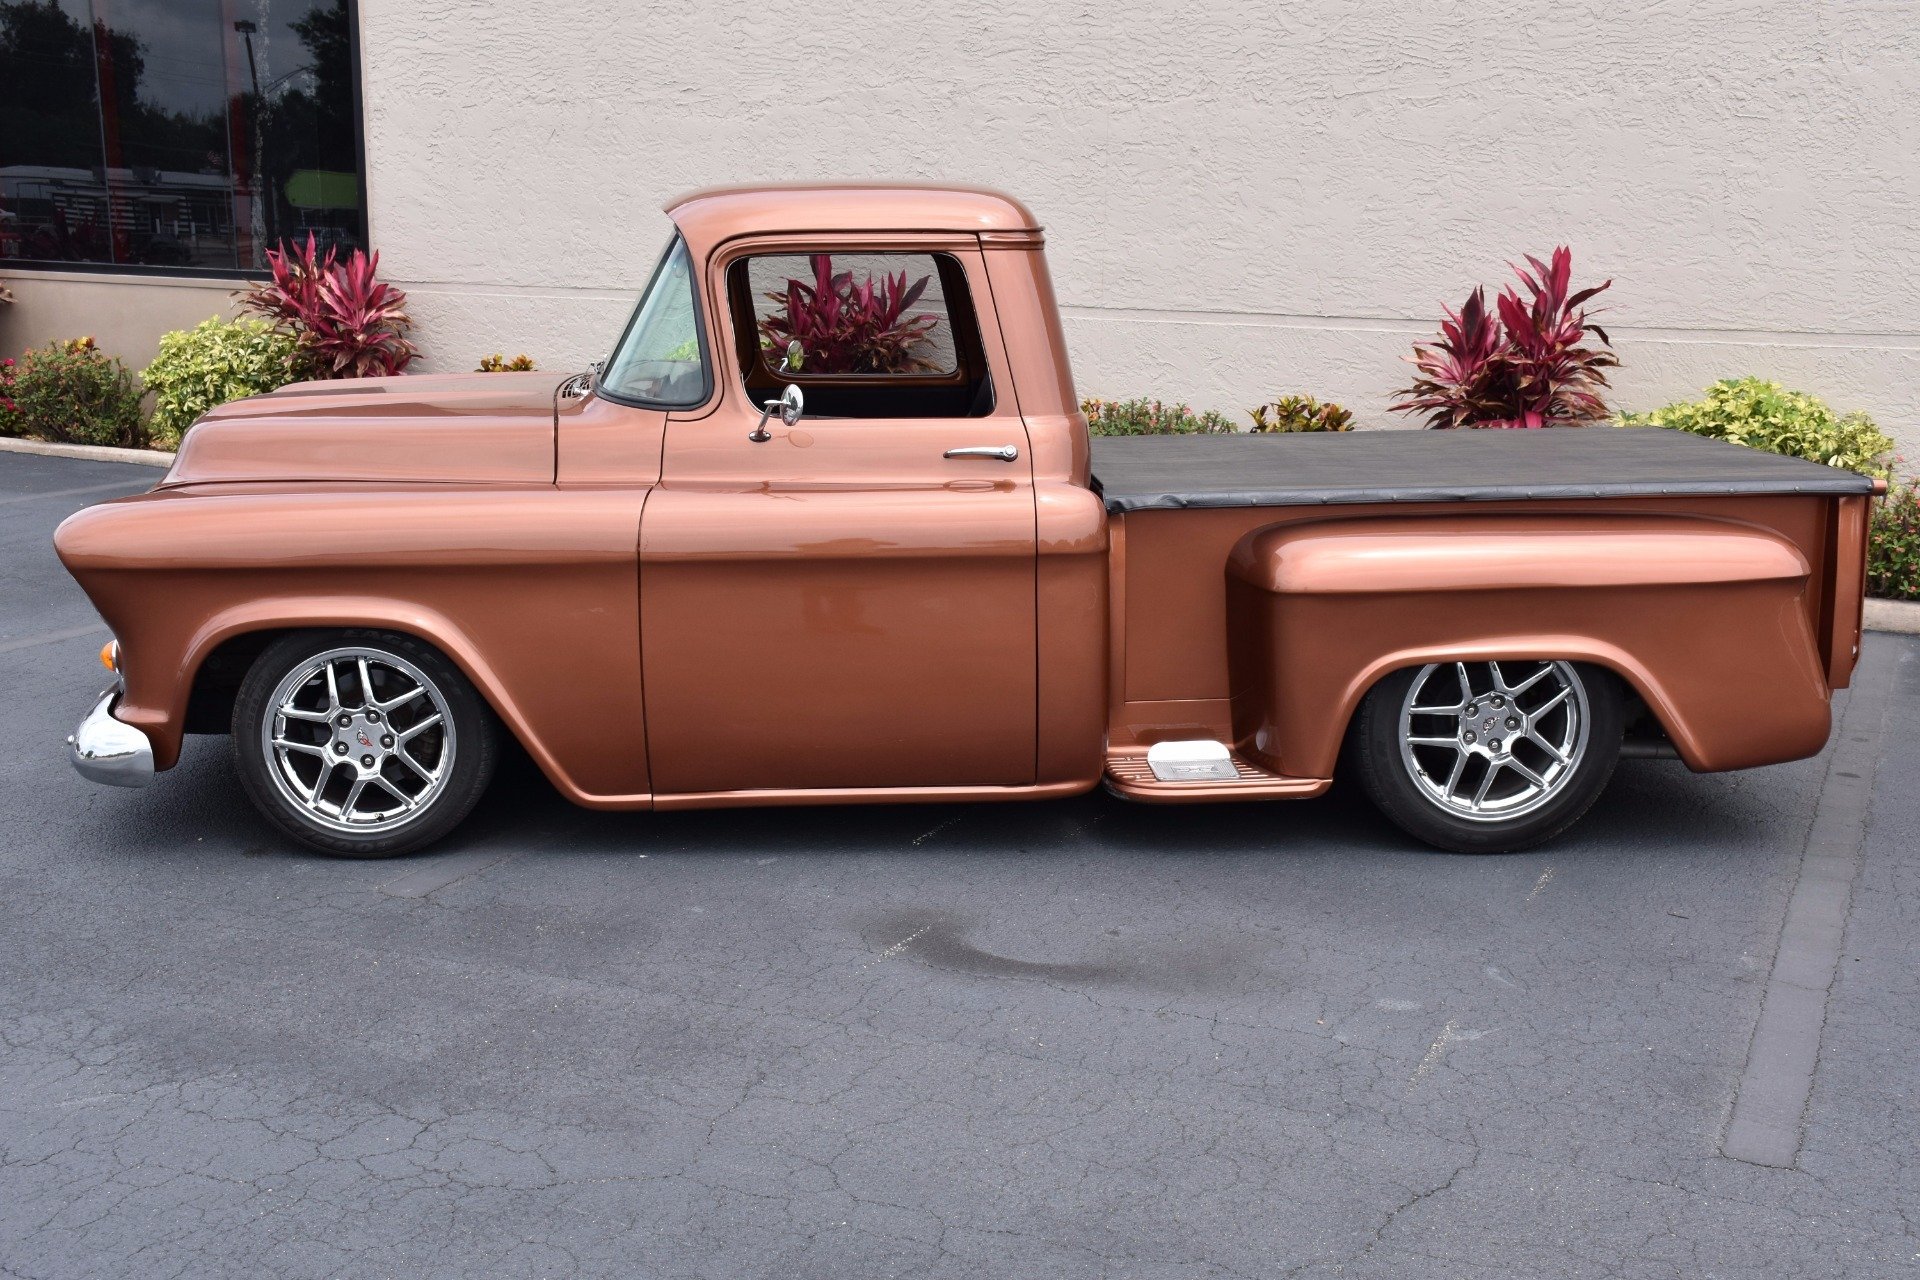 For Sale 1957 Chevrolet Pick Up